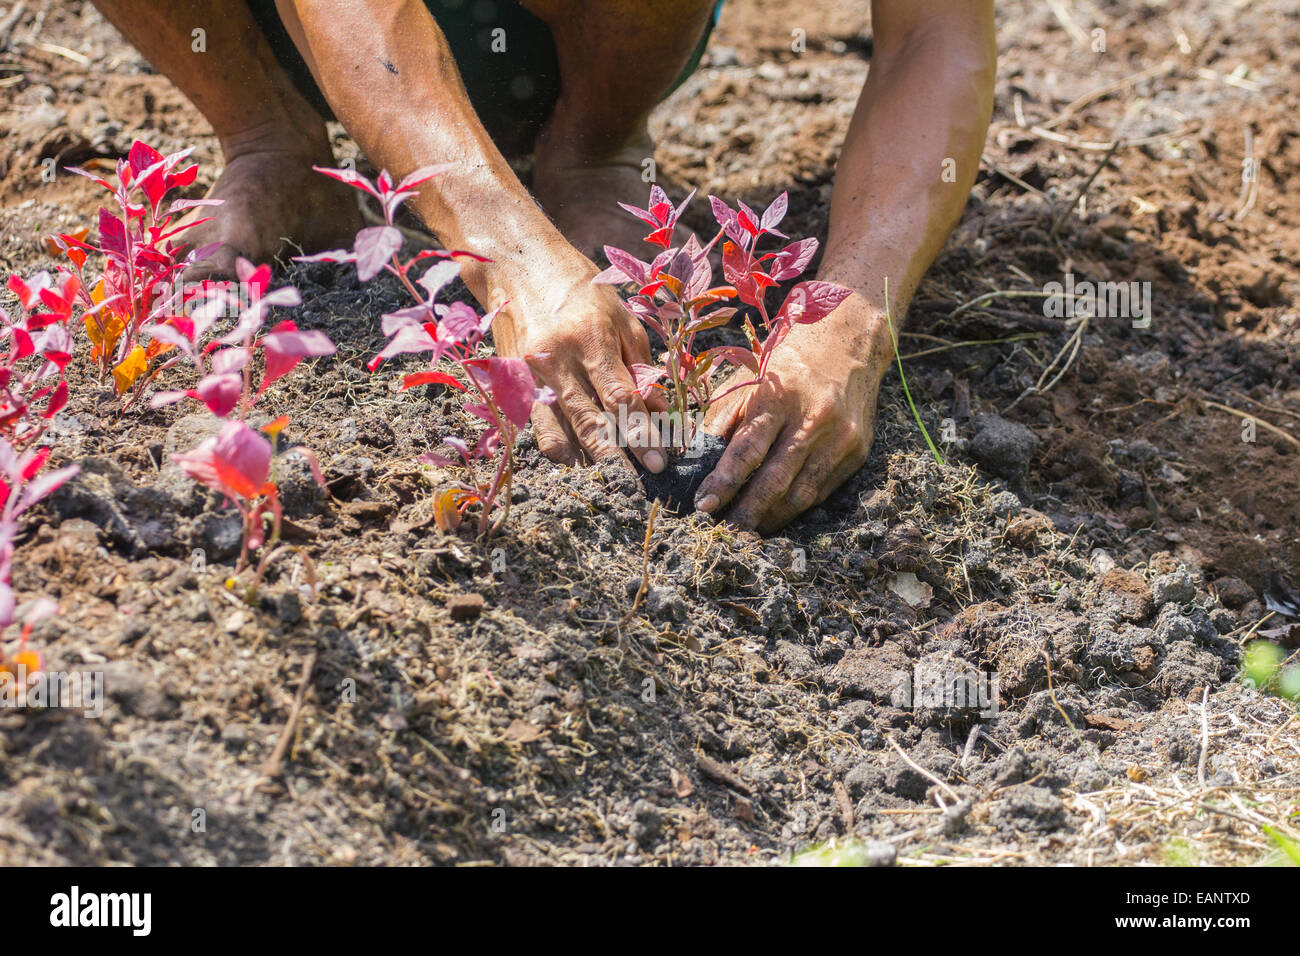 farmer's hands growing a young tree / save the world / heal the world / love nature, in strong sunshine Stock Photo